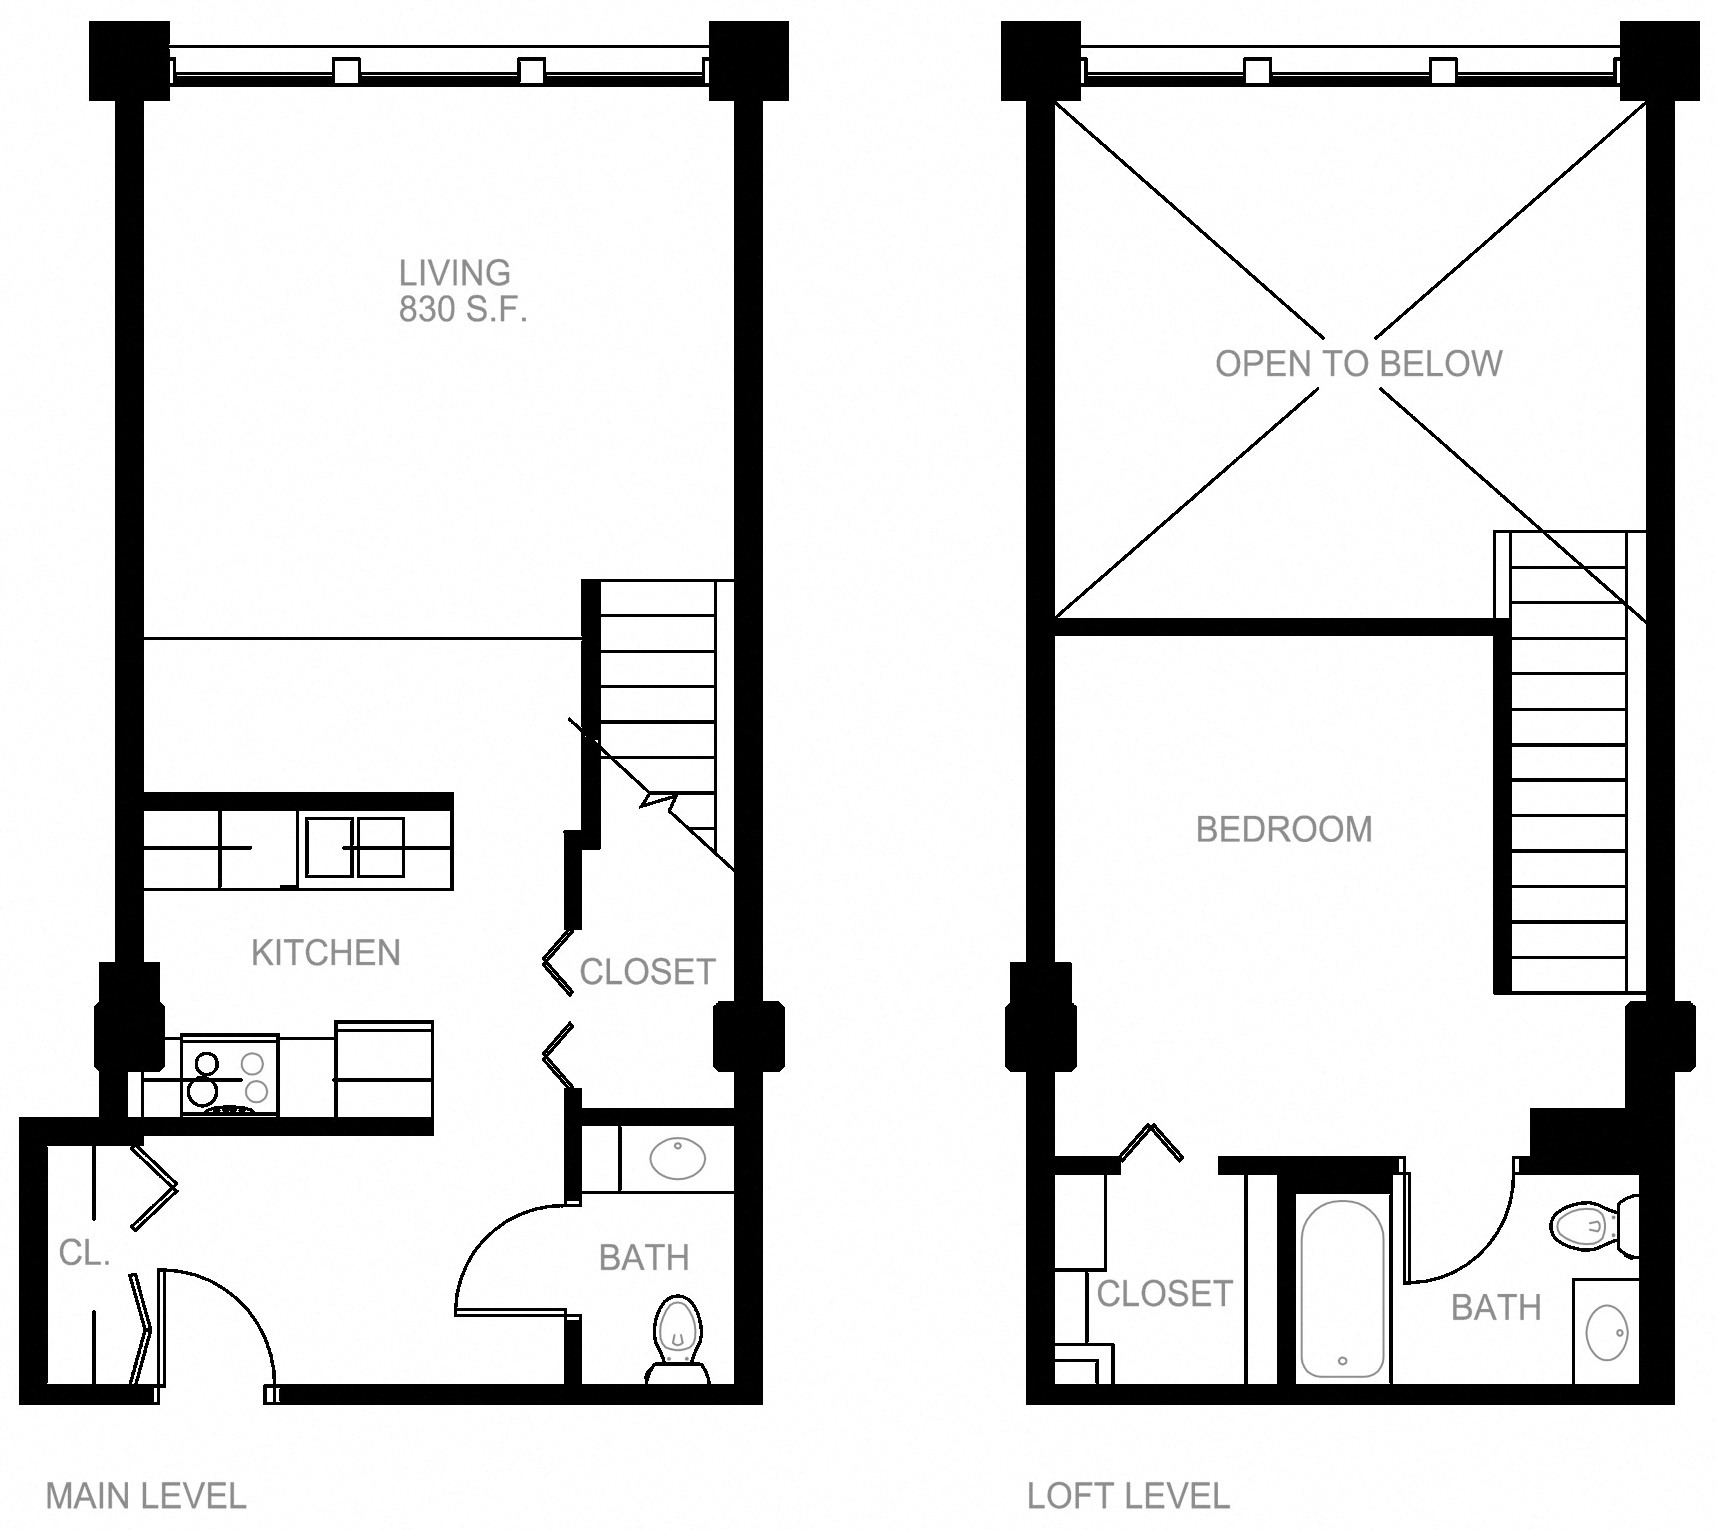 Floorplan for Apartment #P117, 1 bedroom unit at Halstead Providence